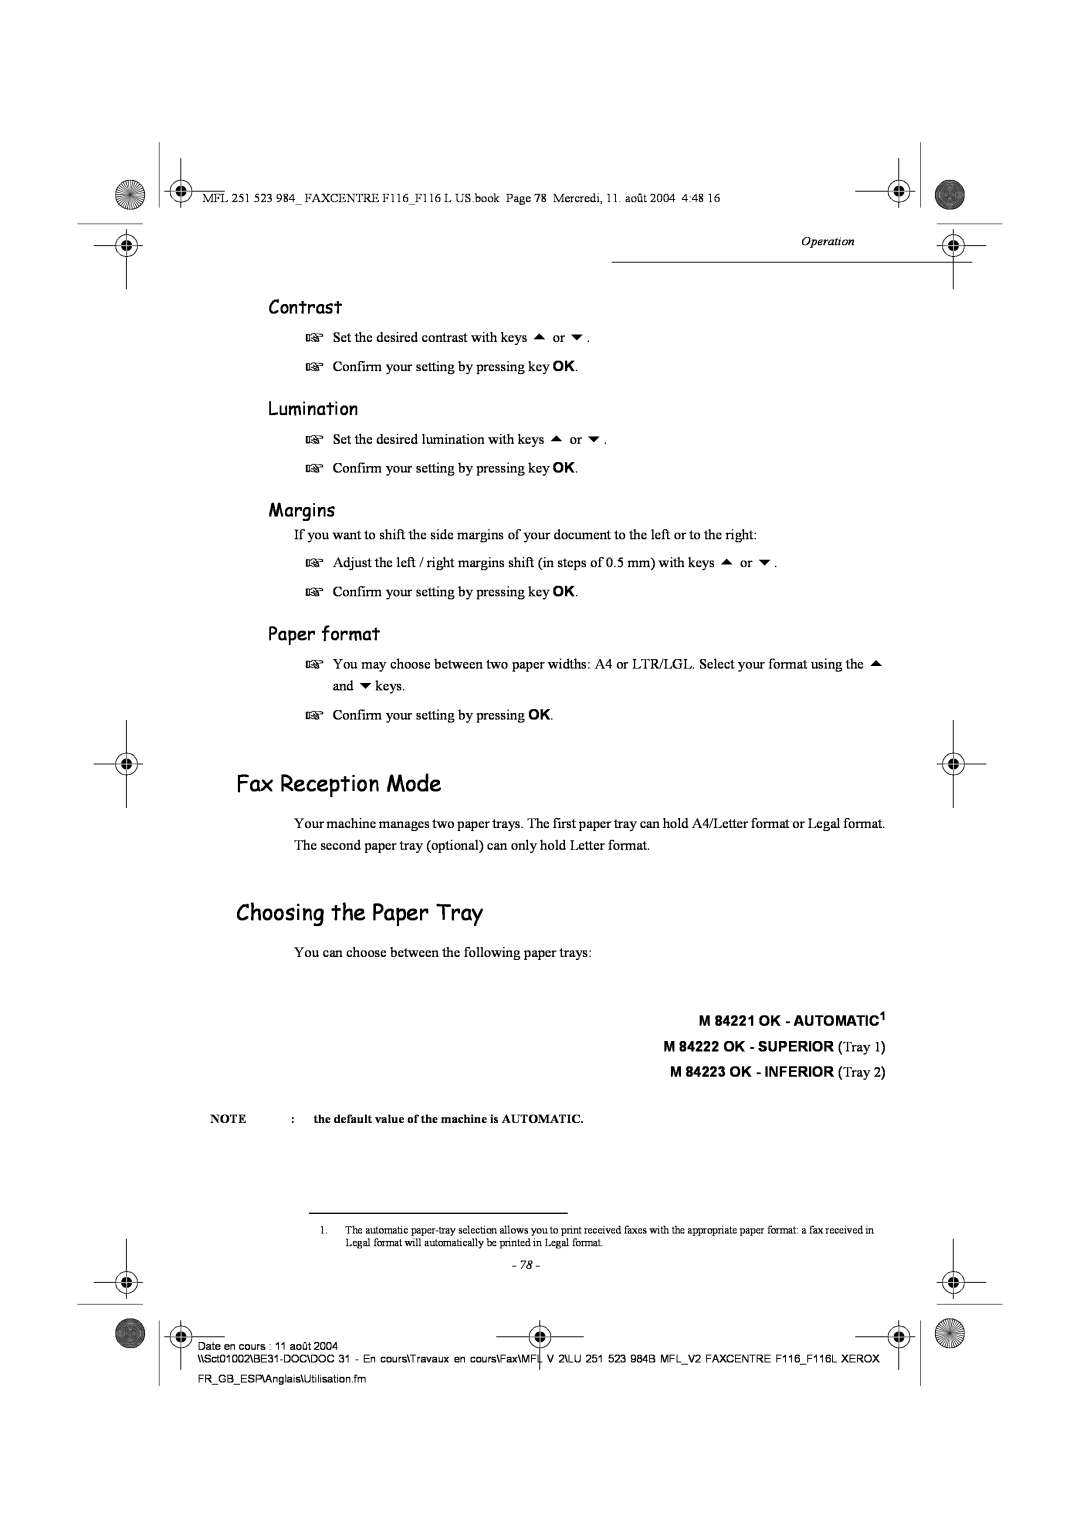 Xerox F116 user manual Fax Reception Mode, Choosing the Paper Tray, Contrast, Lumination, Margins, Paper format 